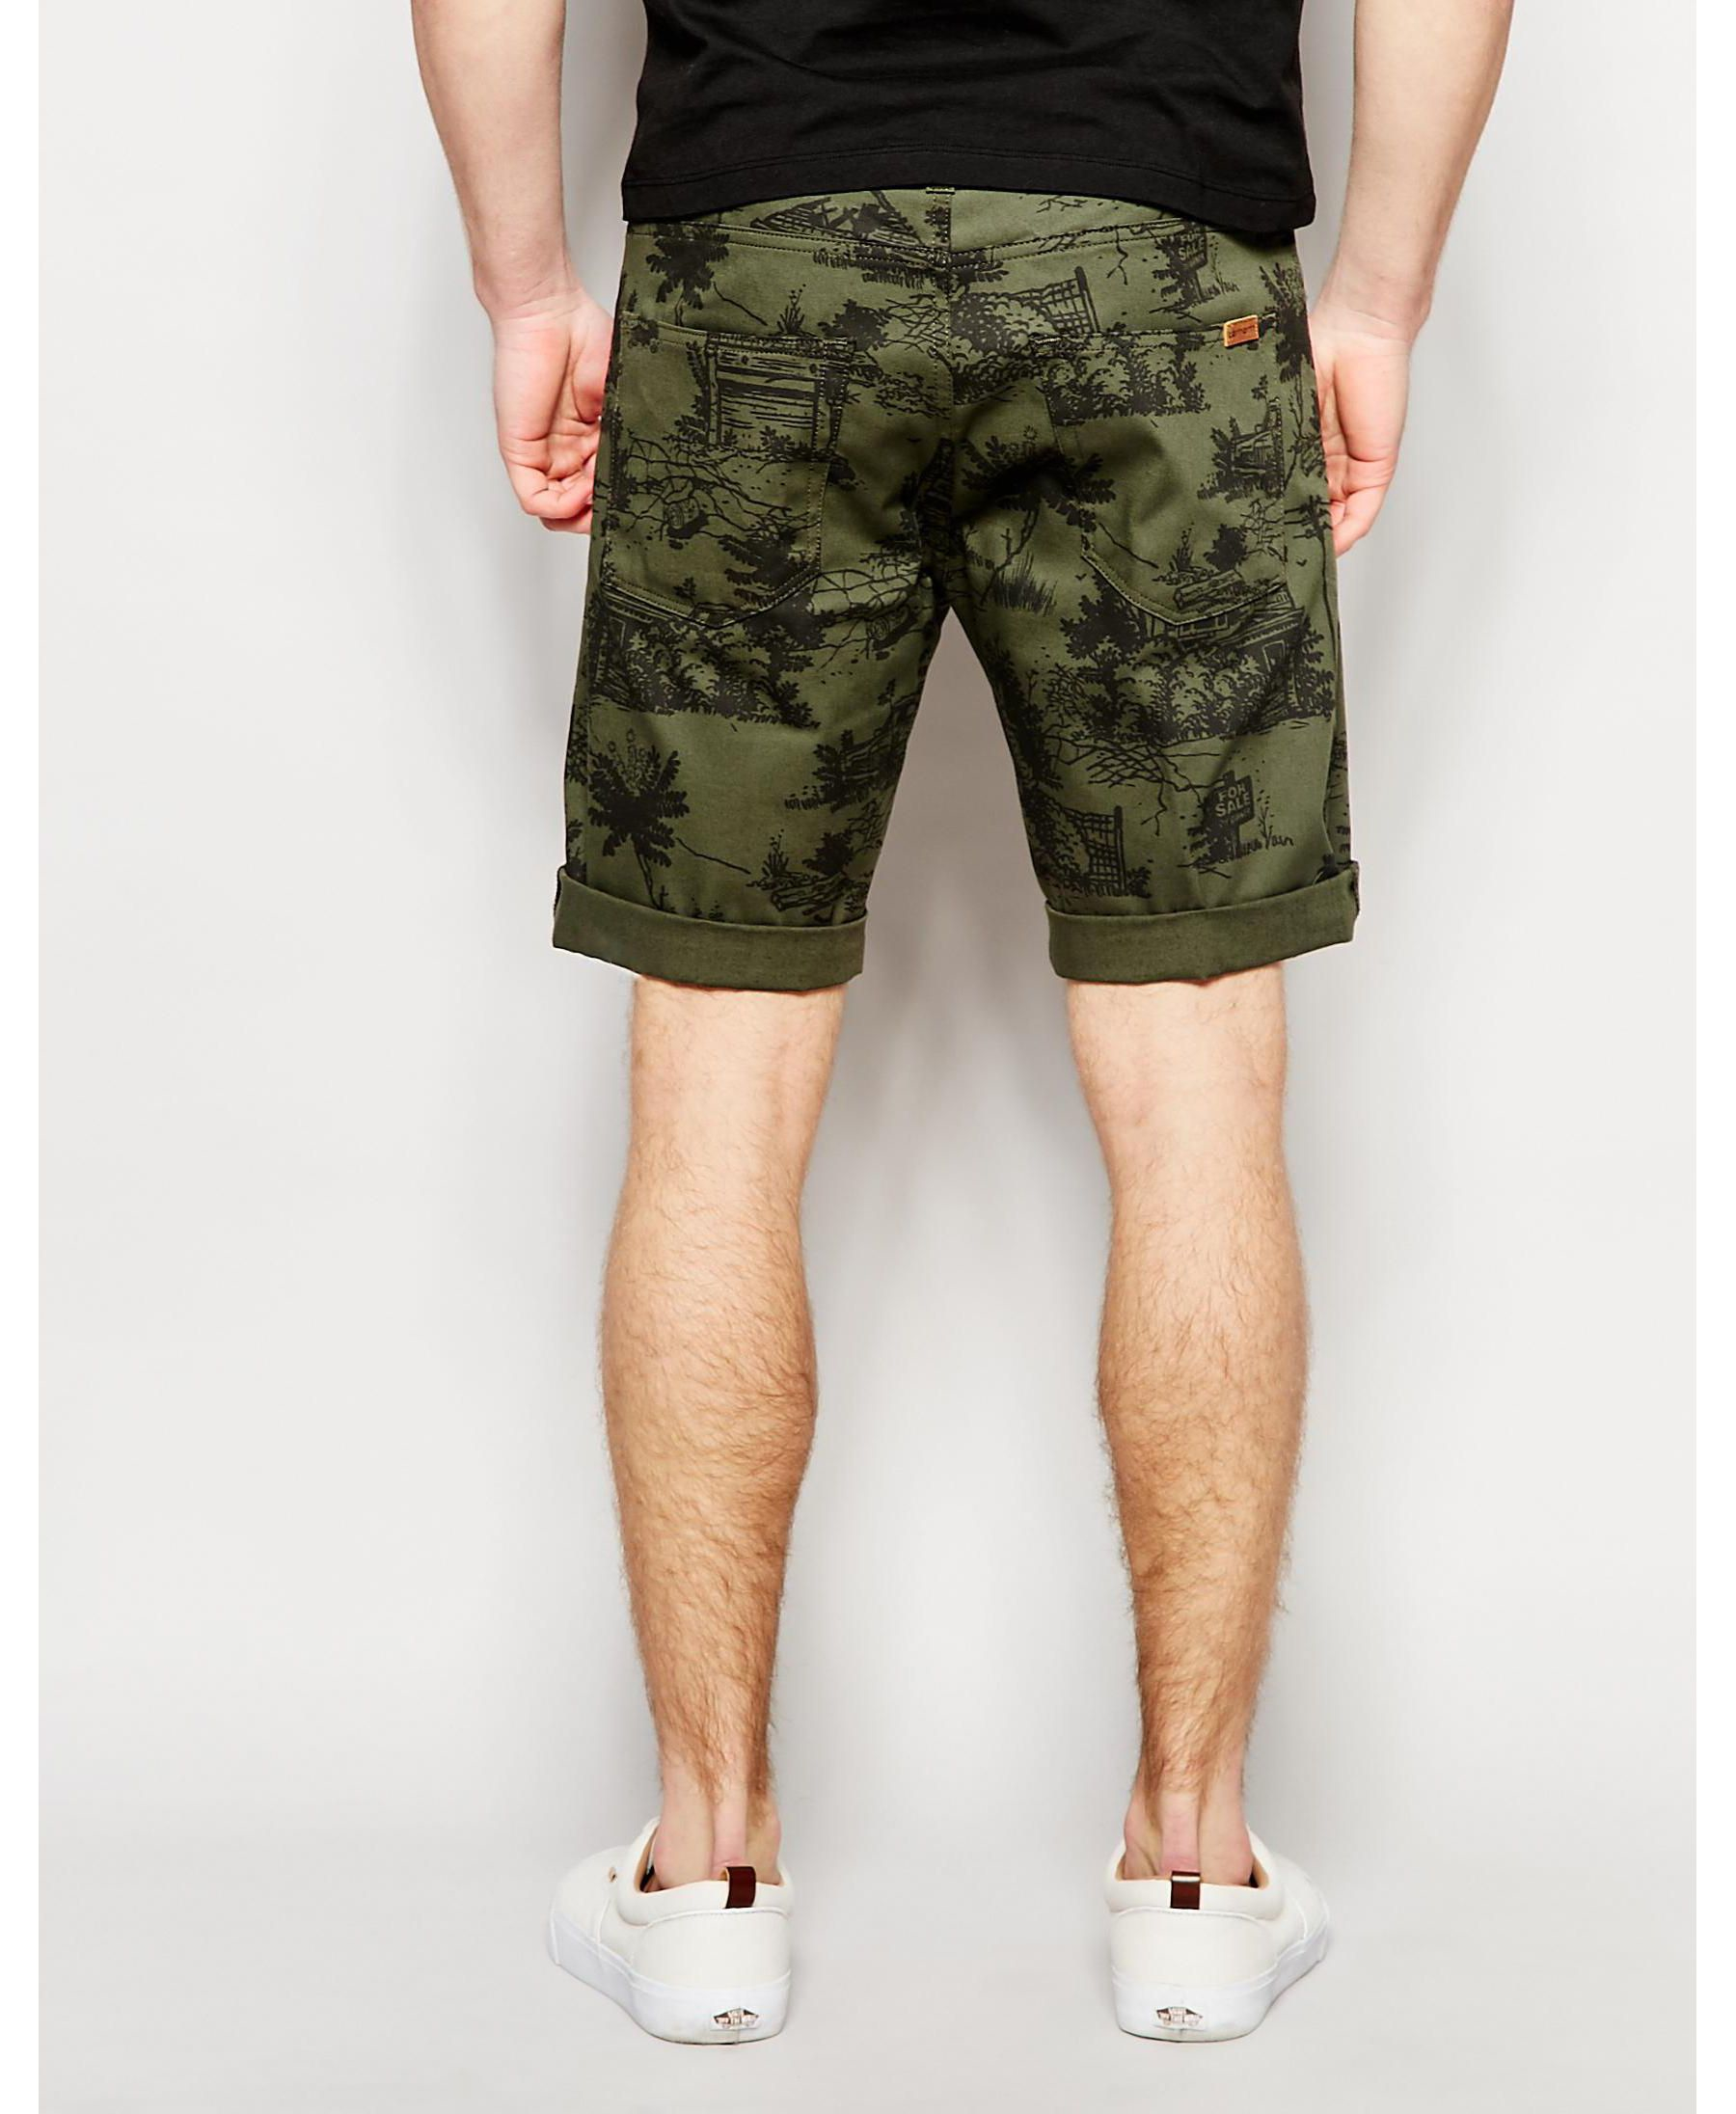 Carhartt WIP Cotton Swell Printed Chino Shorts in Green for Men - Lyst